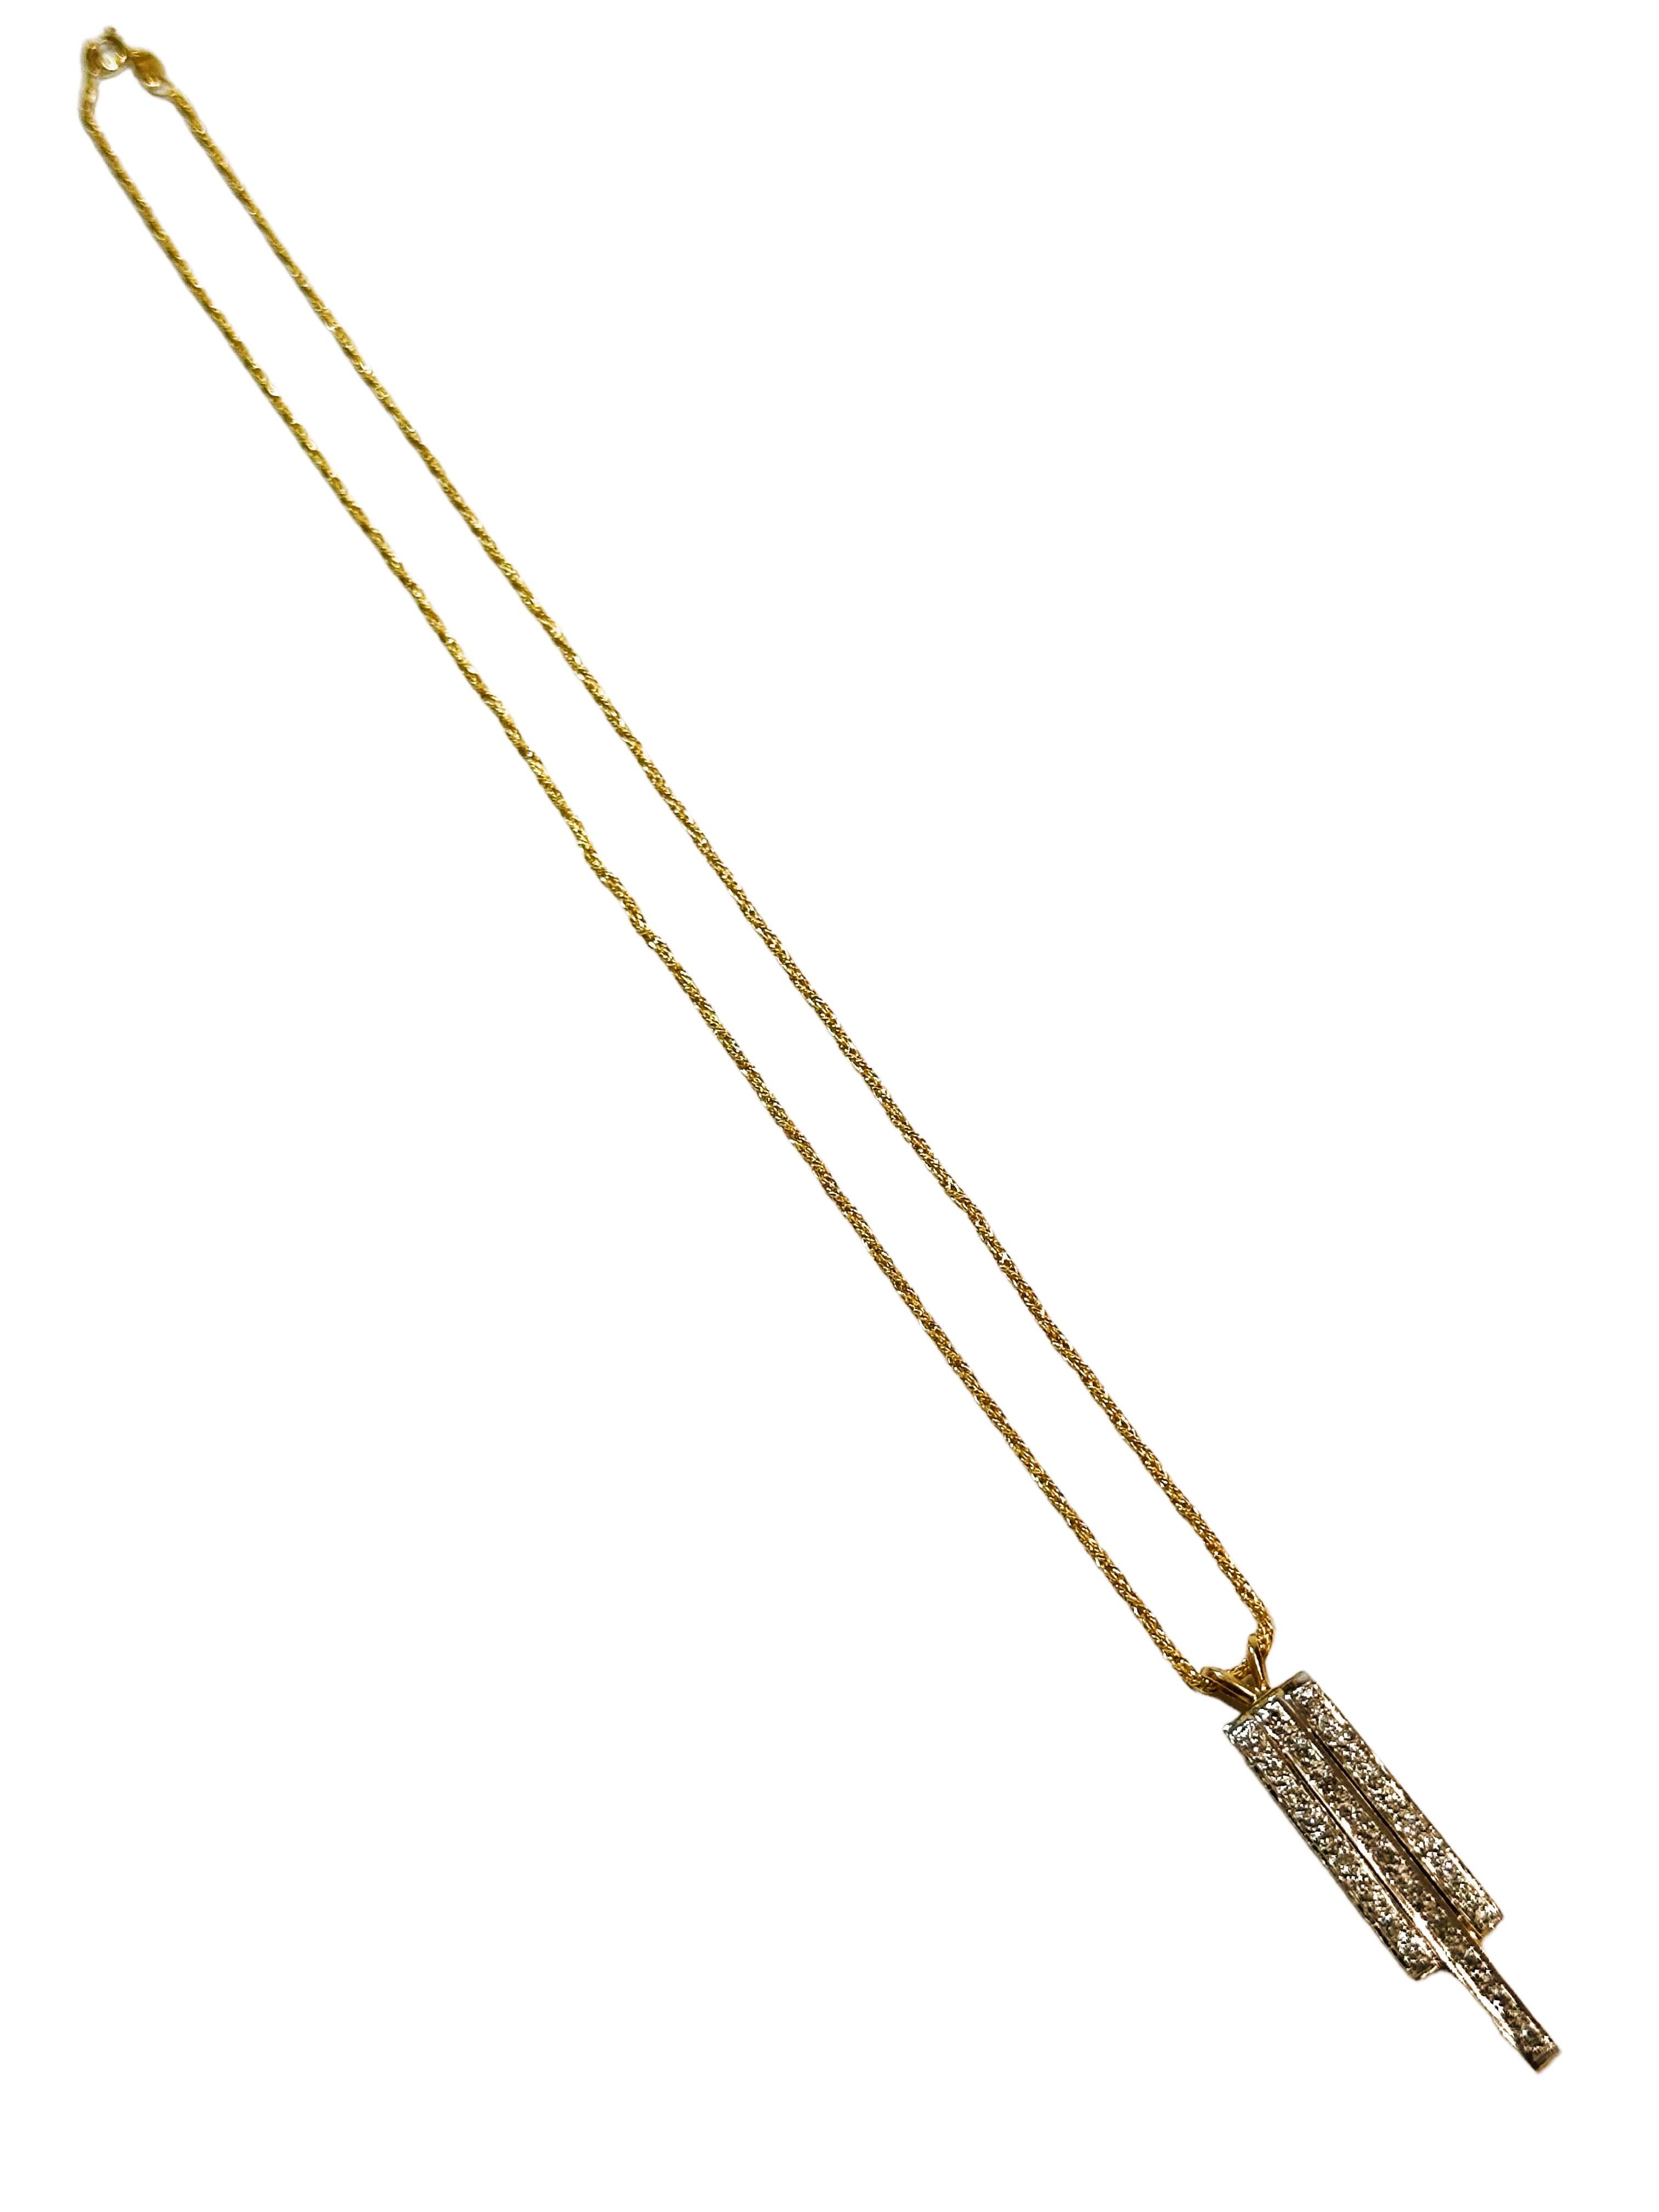 Art Deco Italian Modern 14k Two Tone Gold 1.25 ct Diamond Necklace with Appraisal For Sale